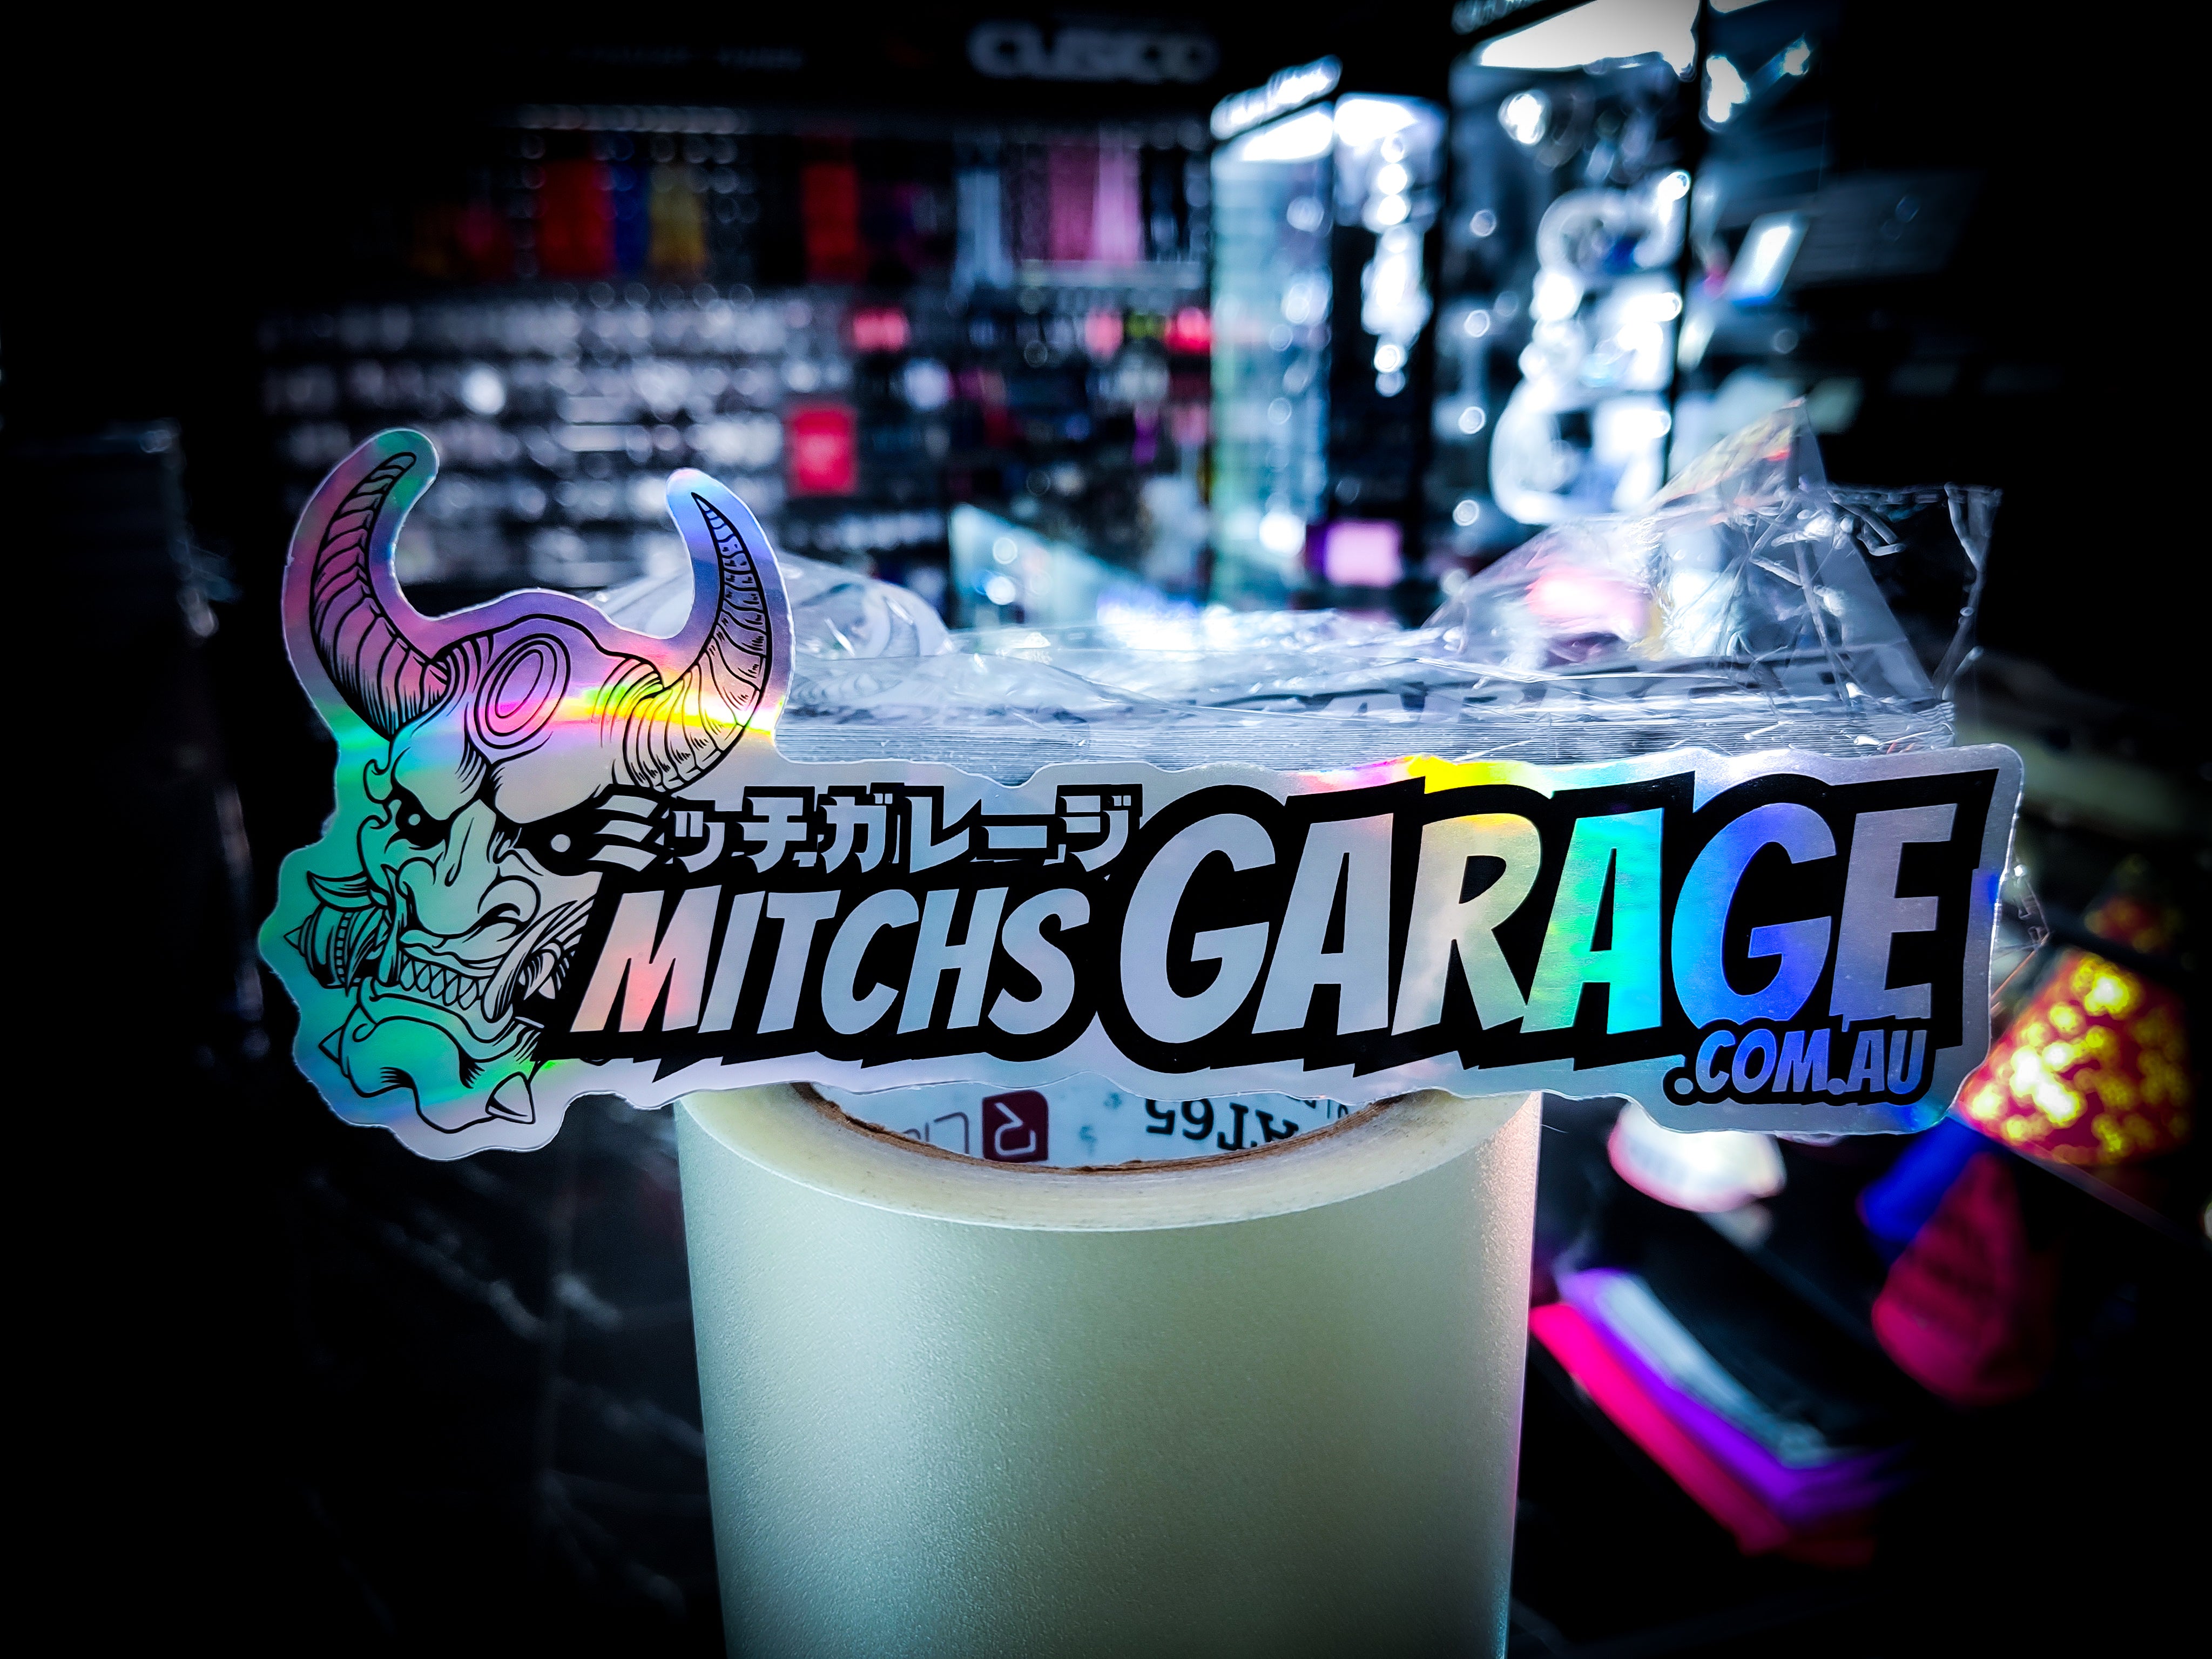 Mitch's Garage Holographic Oni Mask Store Decal